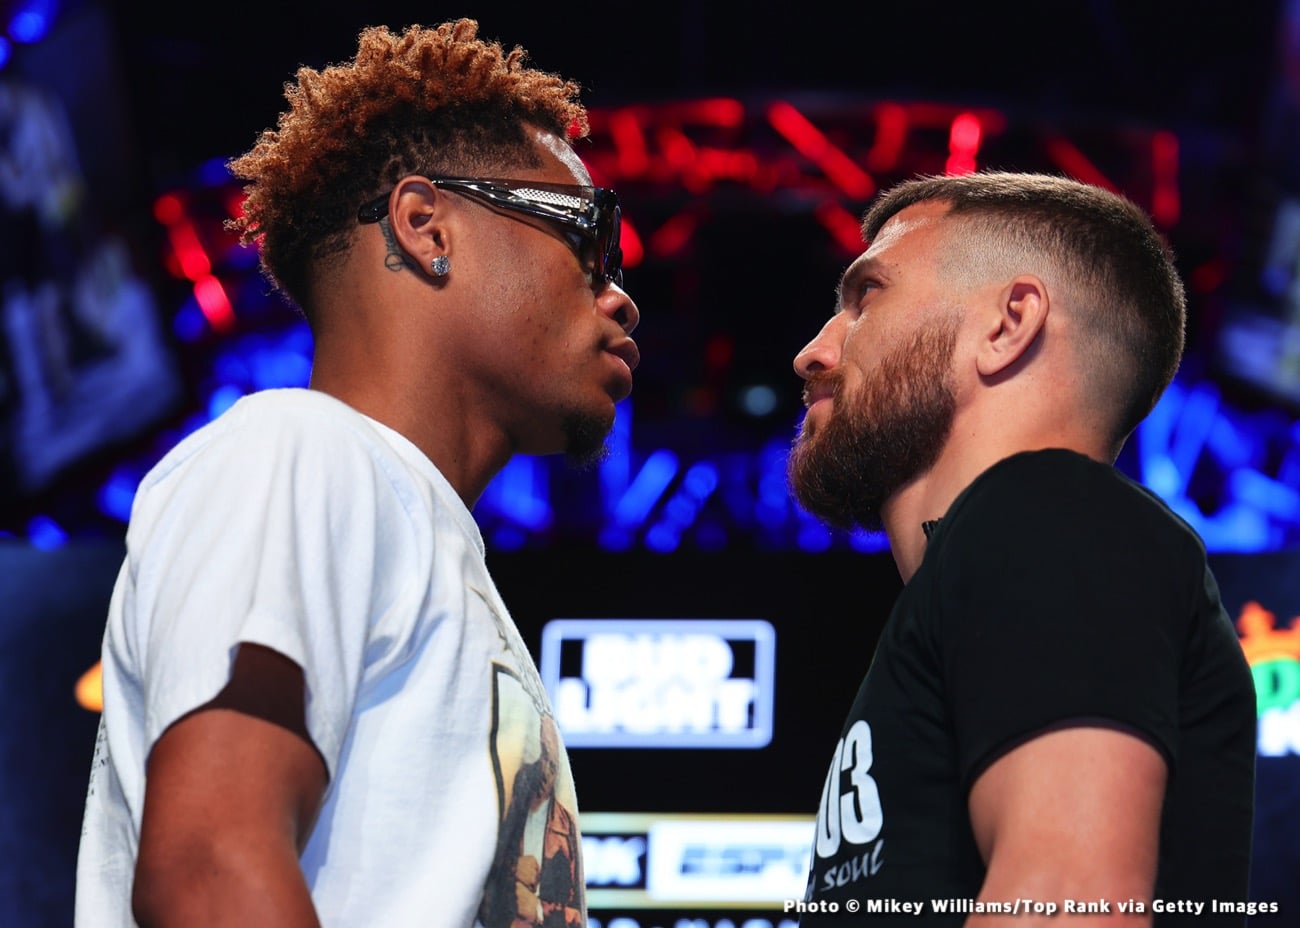 Image: Devin Haney predicts Lomachenko will drop down to 130 after he beats him today